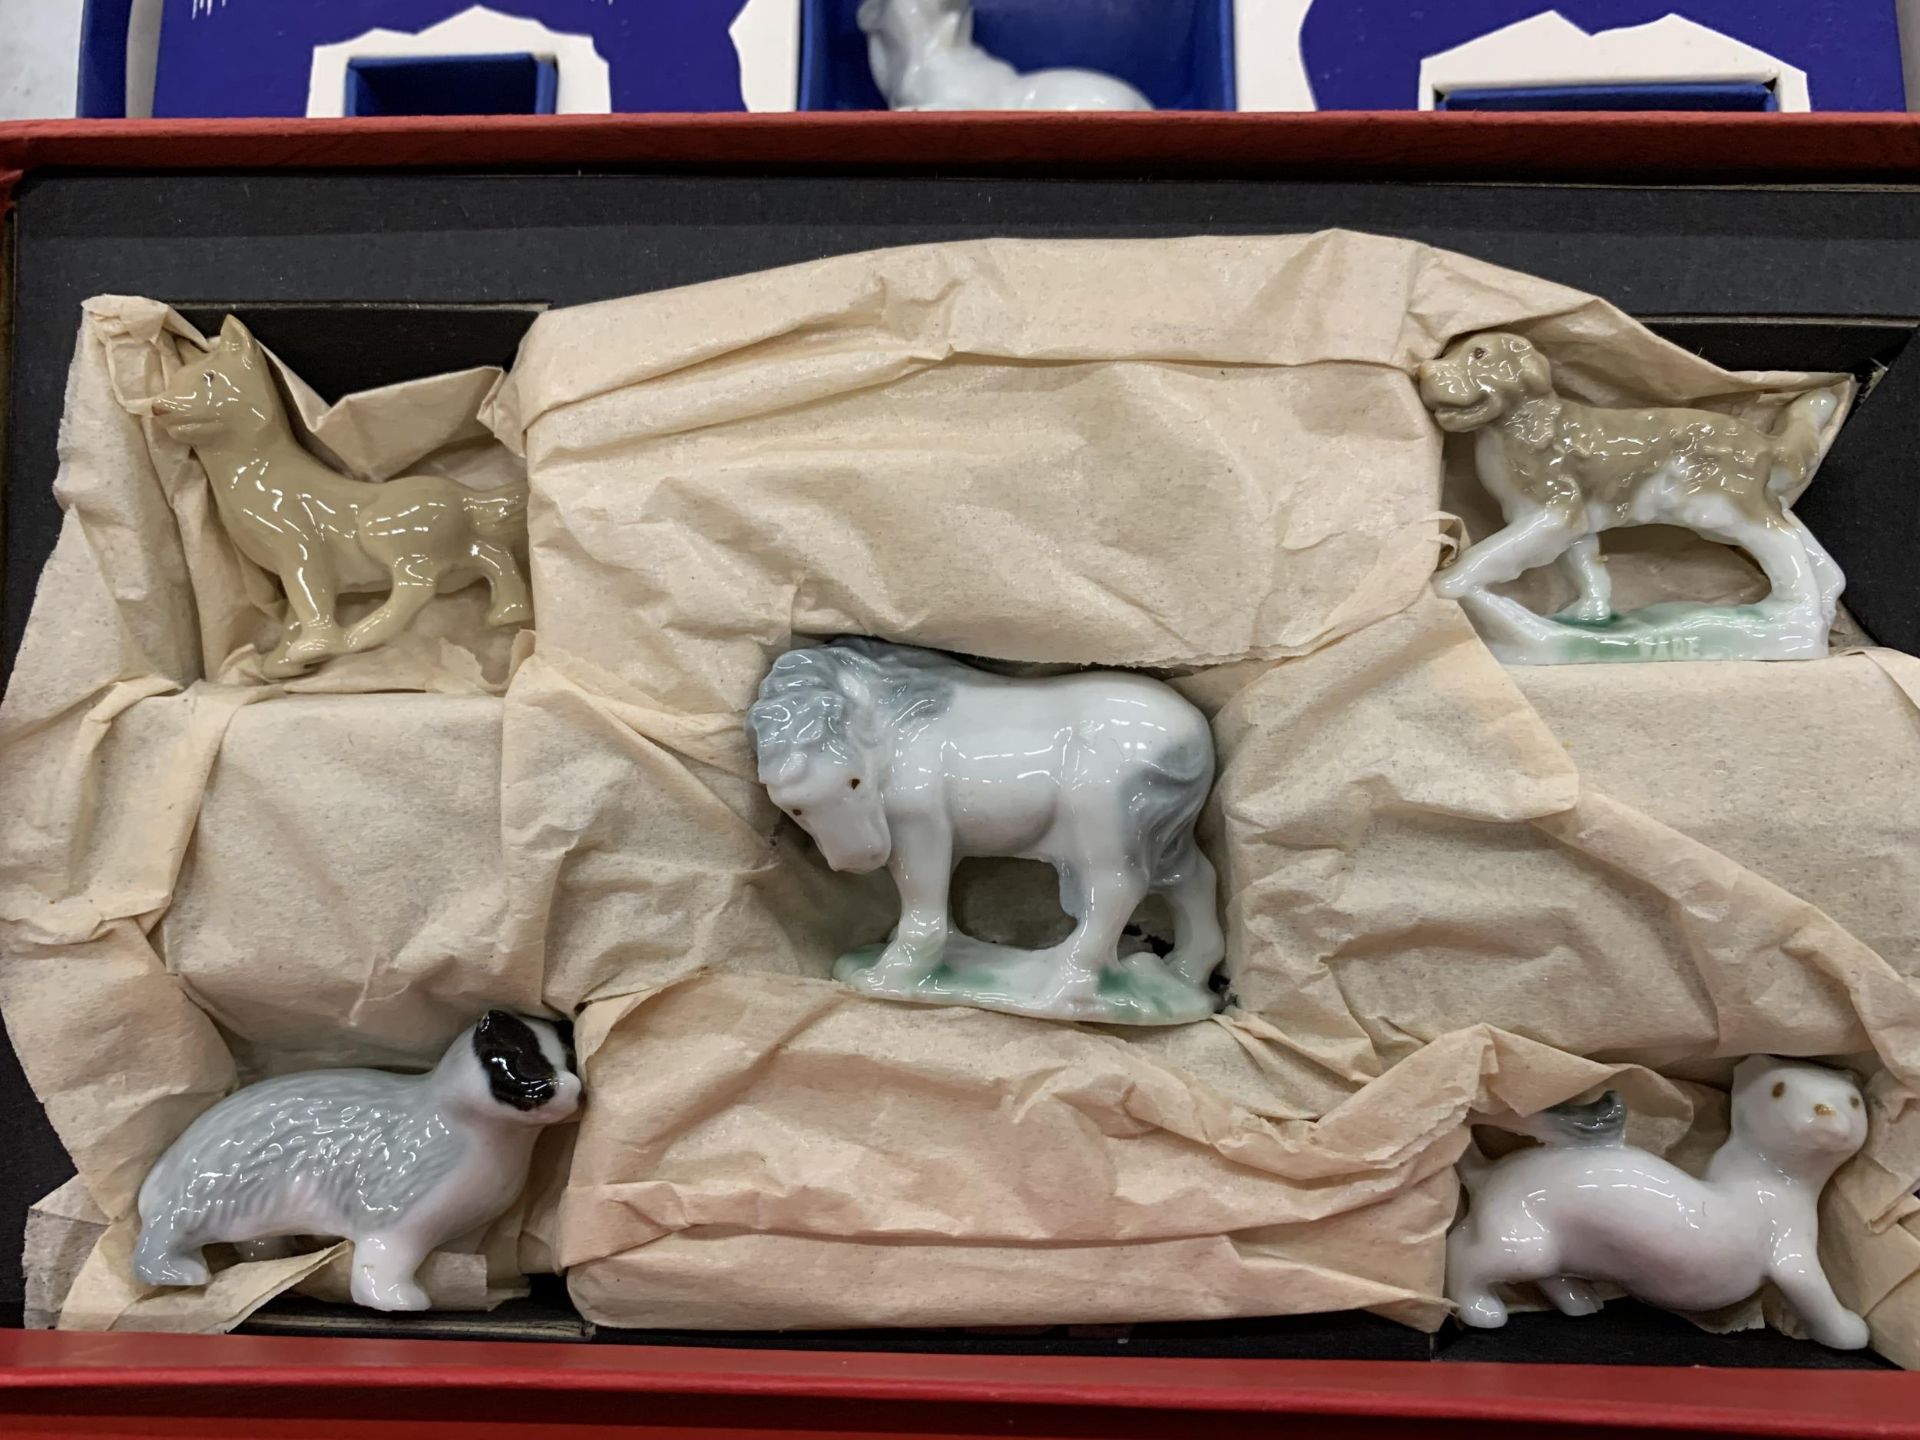 A QUANTITY OF VINTAGE WADE WHIMSIES IN ORIGINAL BOXES TO INCLUDE 'POLAR SET', HORSES, FARM ANIMALS - Image 4 of 4